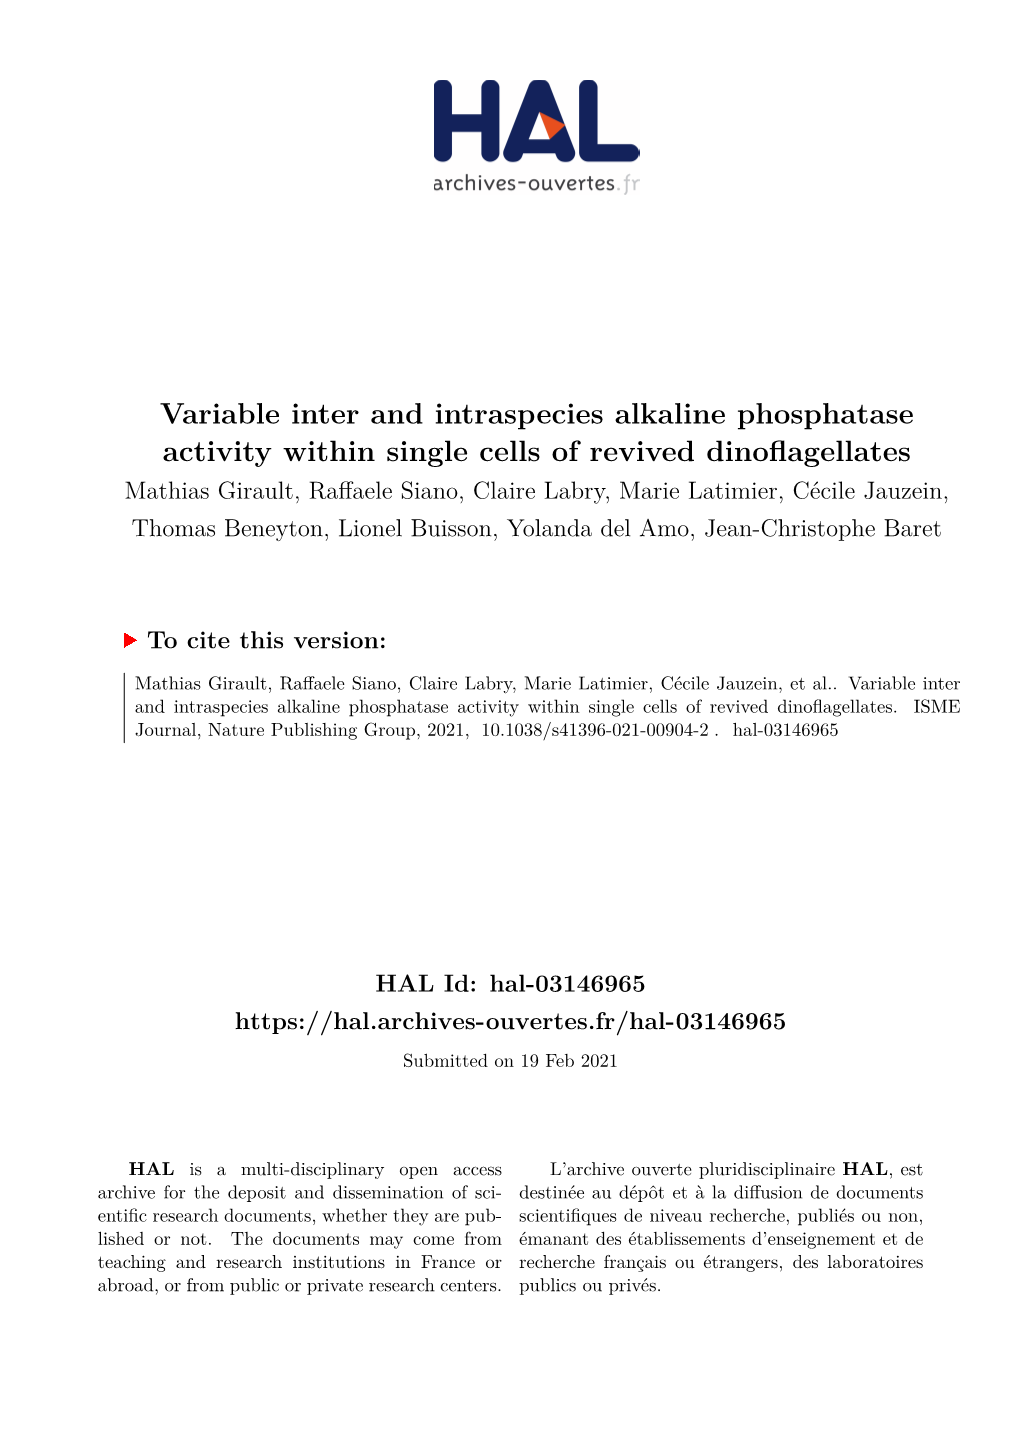 Variable Inter and Intraspecies Alkaline Phosphatase Activity Within